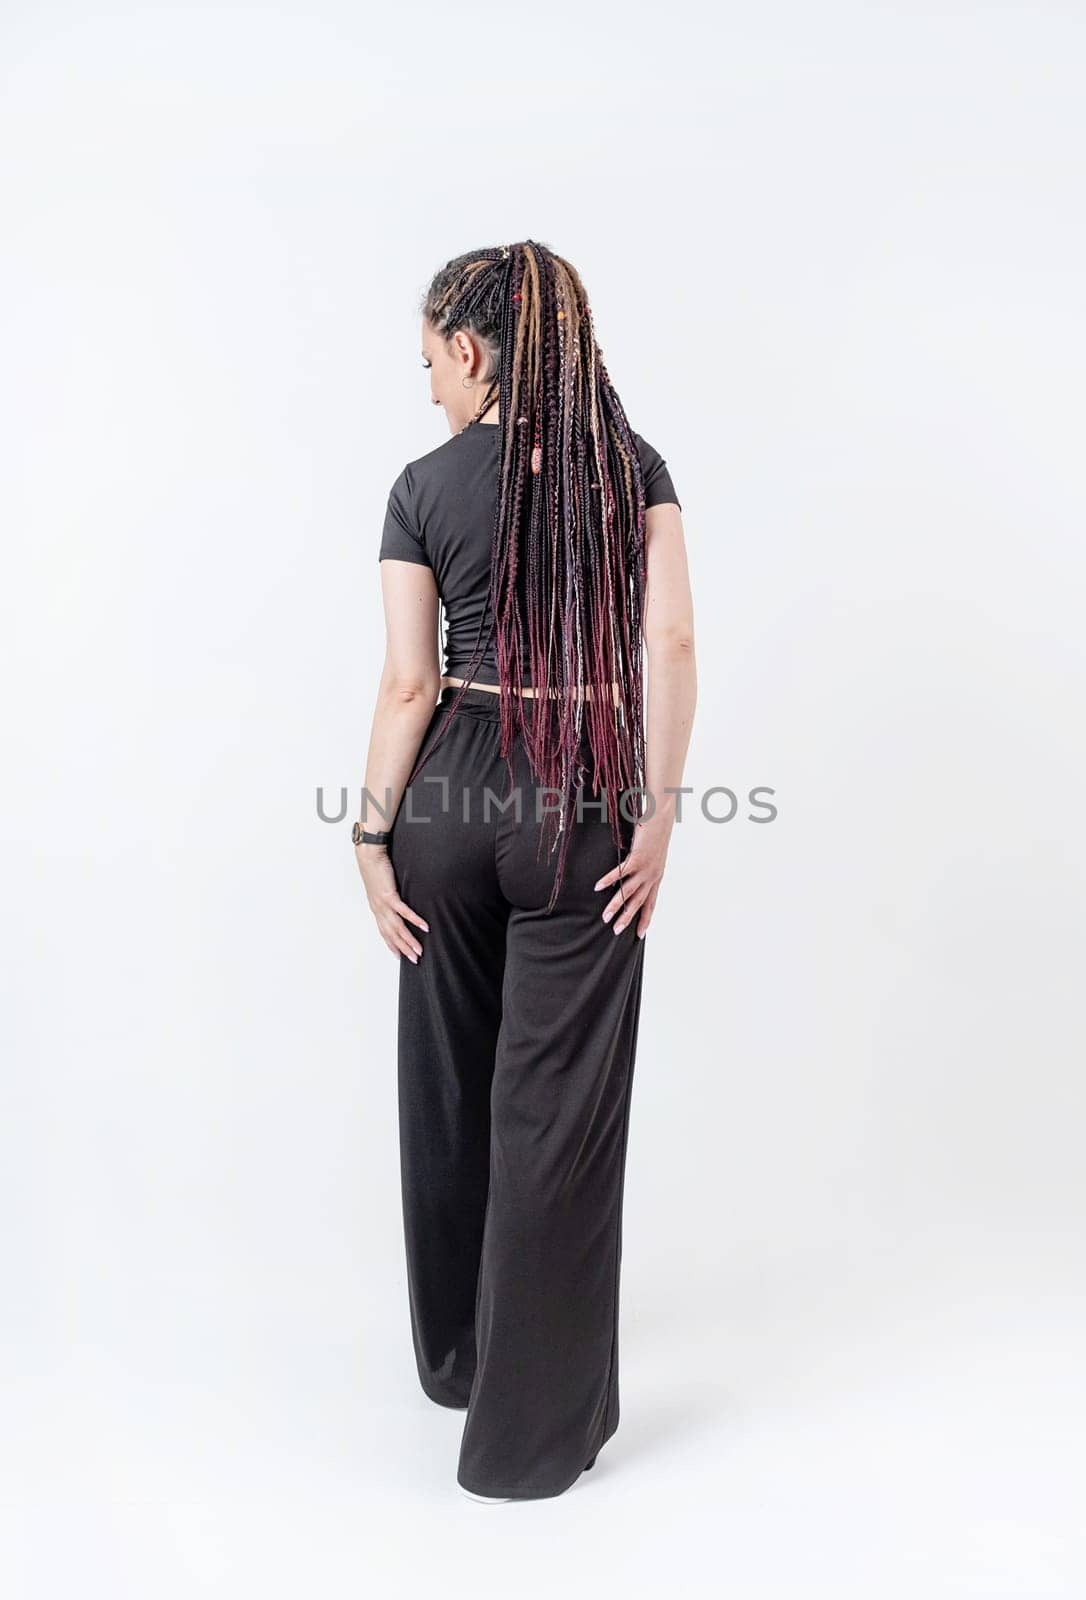 Fashionable young beautiful woman . Slim girl with dreadlocks in an active pose in black pants and top . Fashion, clothing and style.